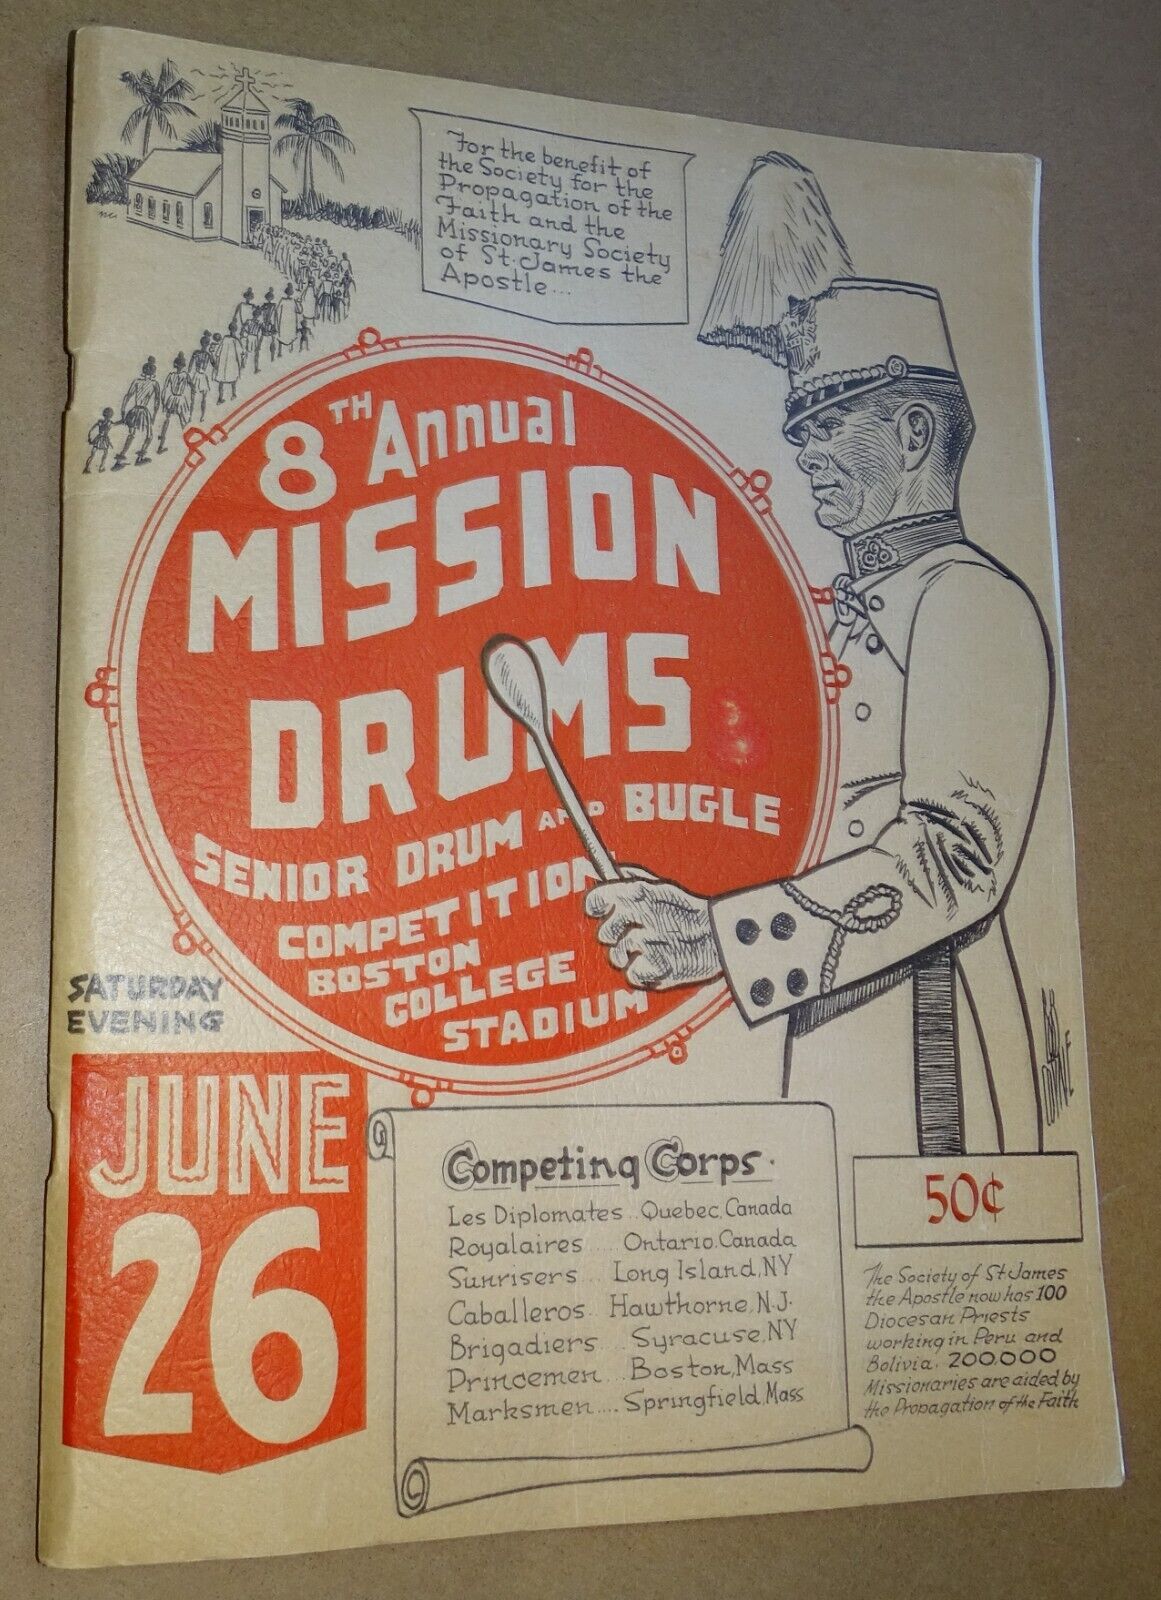 8th Annual Mission Drums & Bugle Competition BOSTON COLLEGE 1965 Program